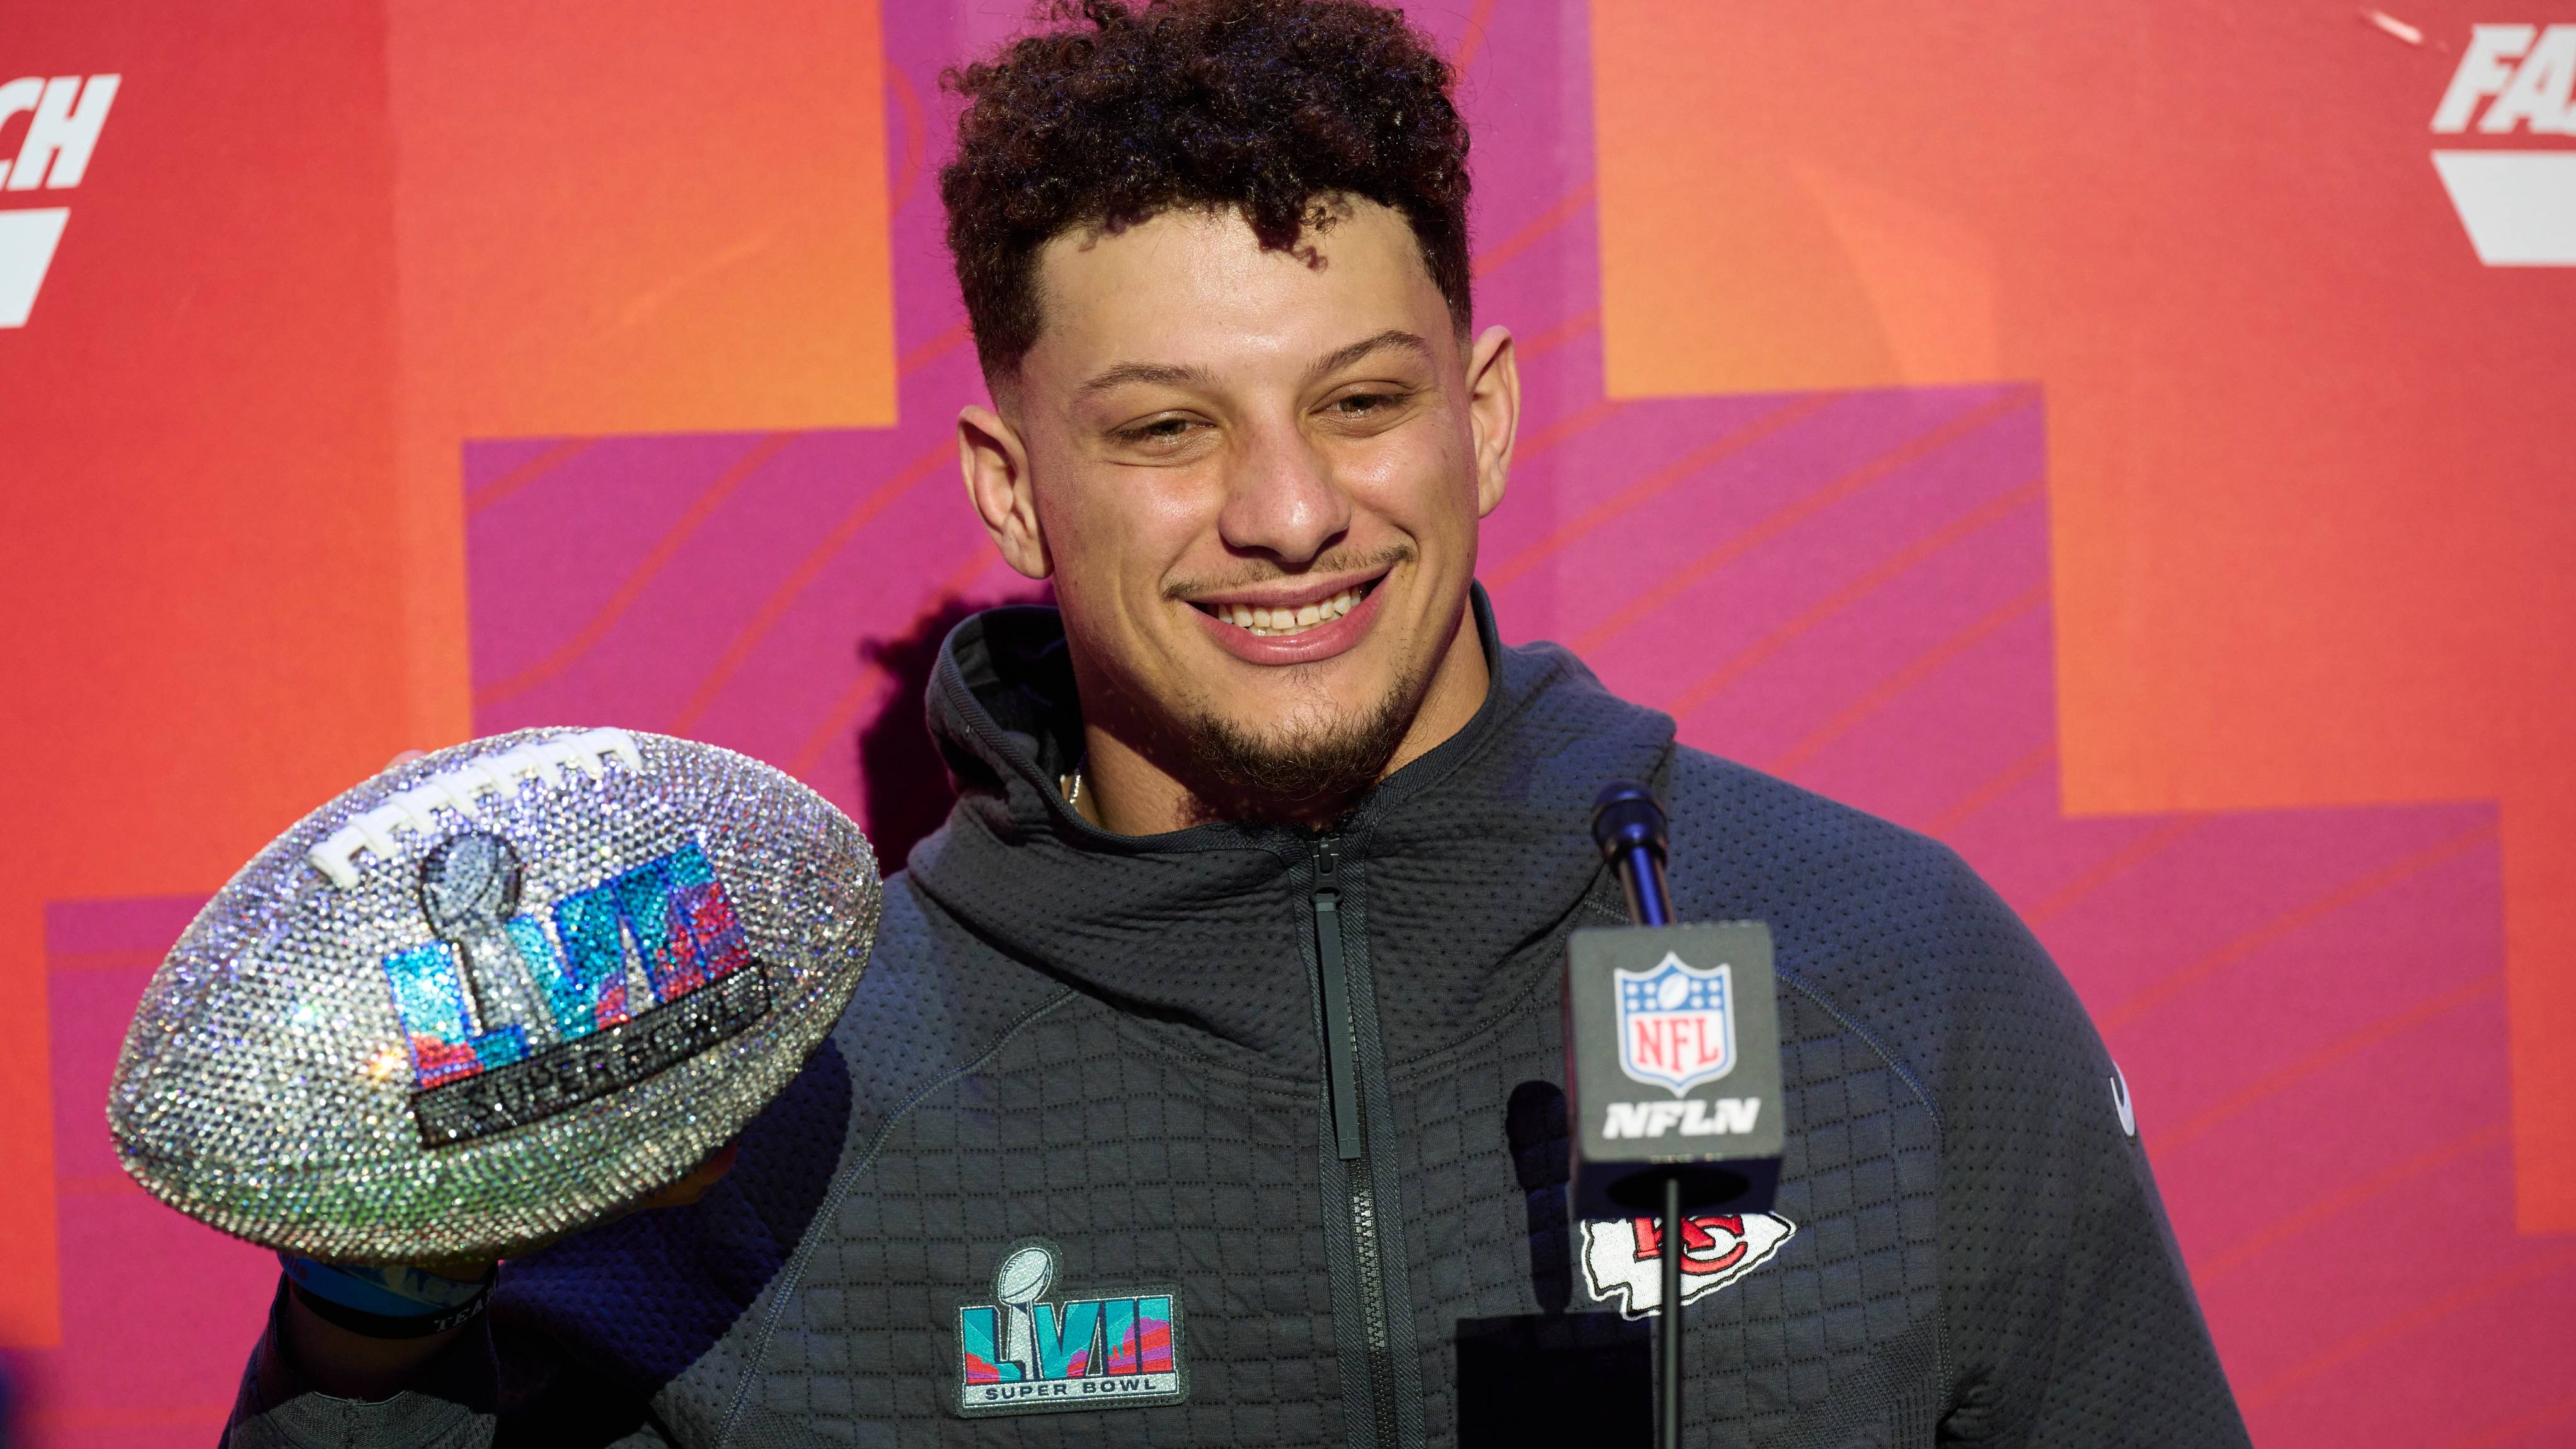 20 Things You Didn't Know About Patrick Mahomes